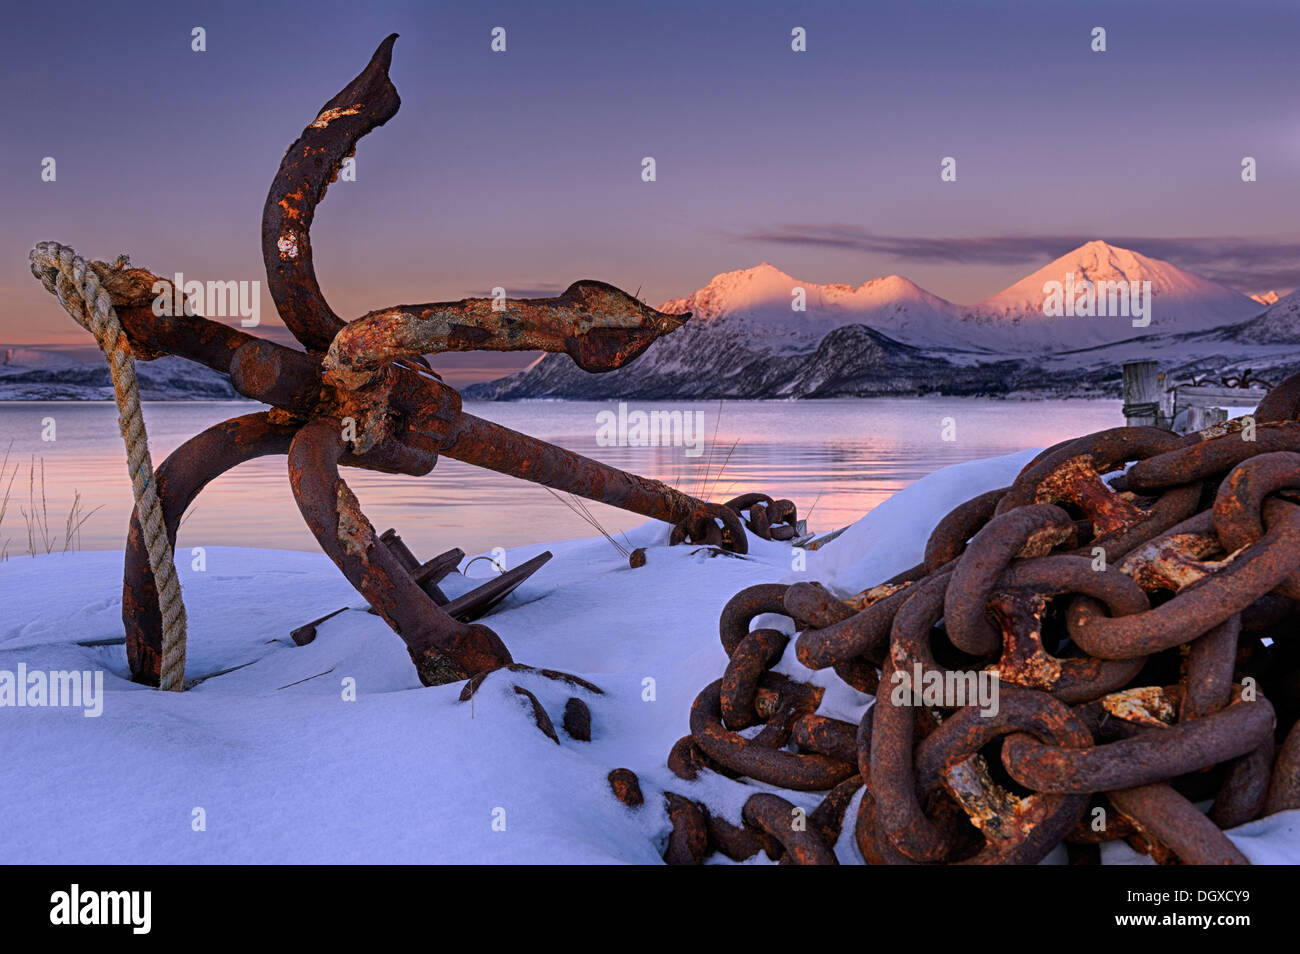 Rusty anchor in front of a fjord with a mountain range in the evening light, Tromsø, Troms, Northern Norway, Norway Stock Photo